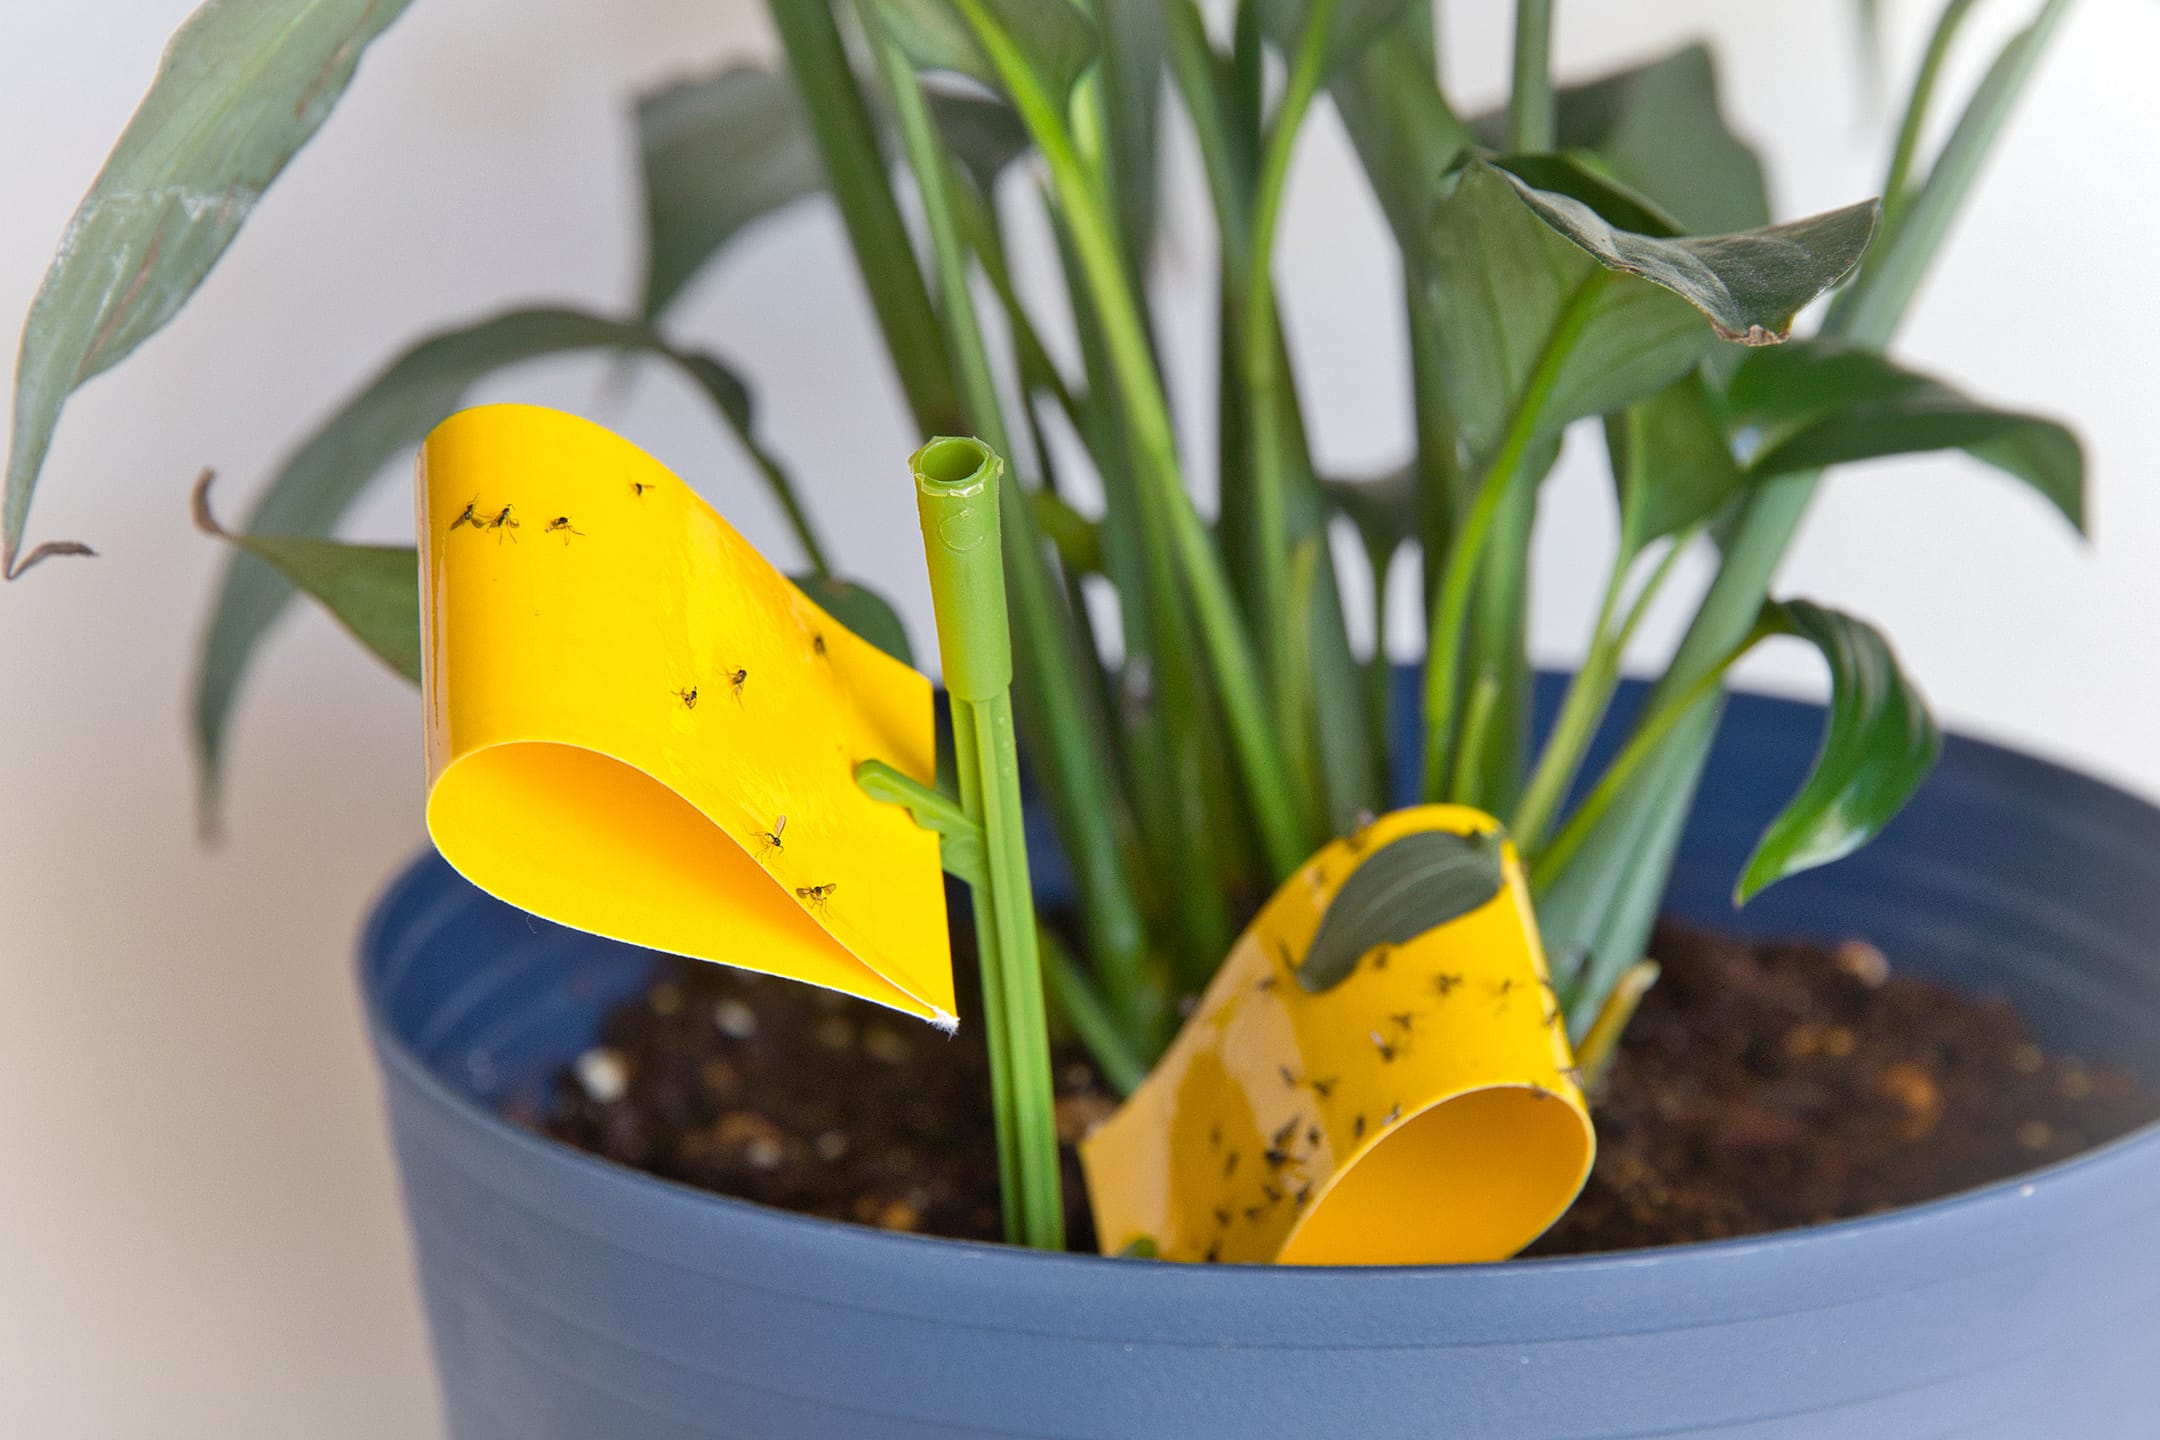 The Ultimate Hack To Banish Gnats From Your House Plants!